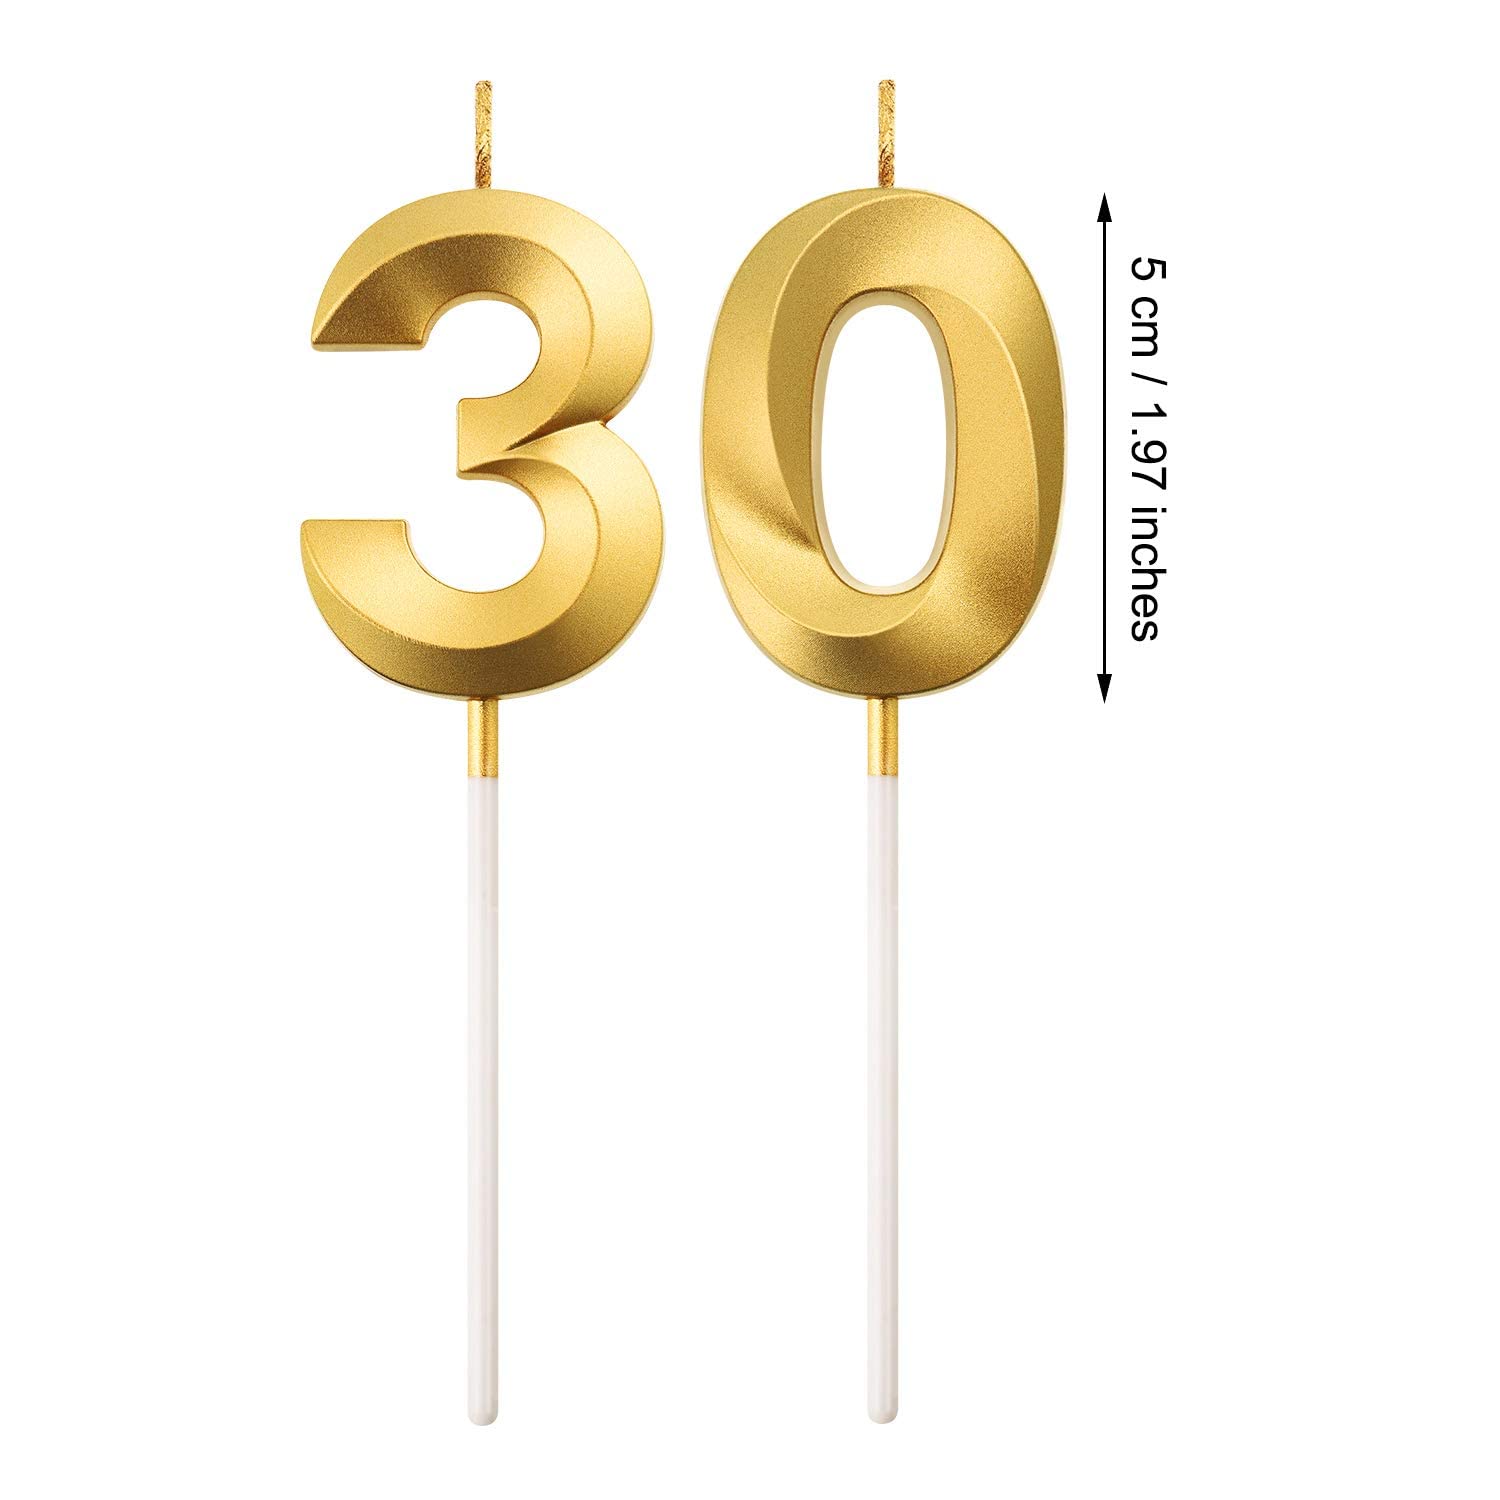 30th Birthday Candles Cake Numeral Candles Happy Birthday Cake Topper Decoration for Birthday Party Wedding Anniversary Celebration Supplies (Gold)